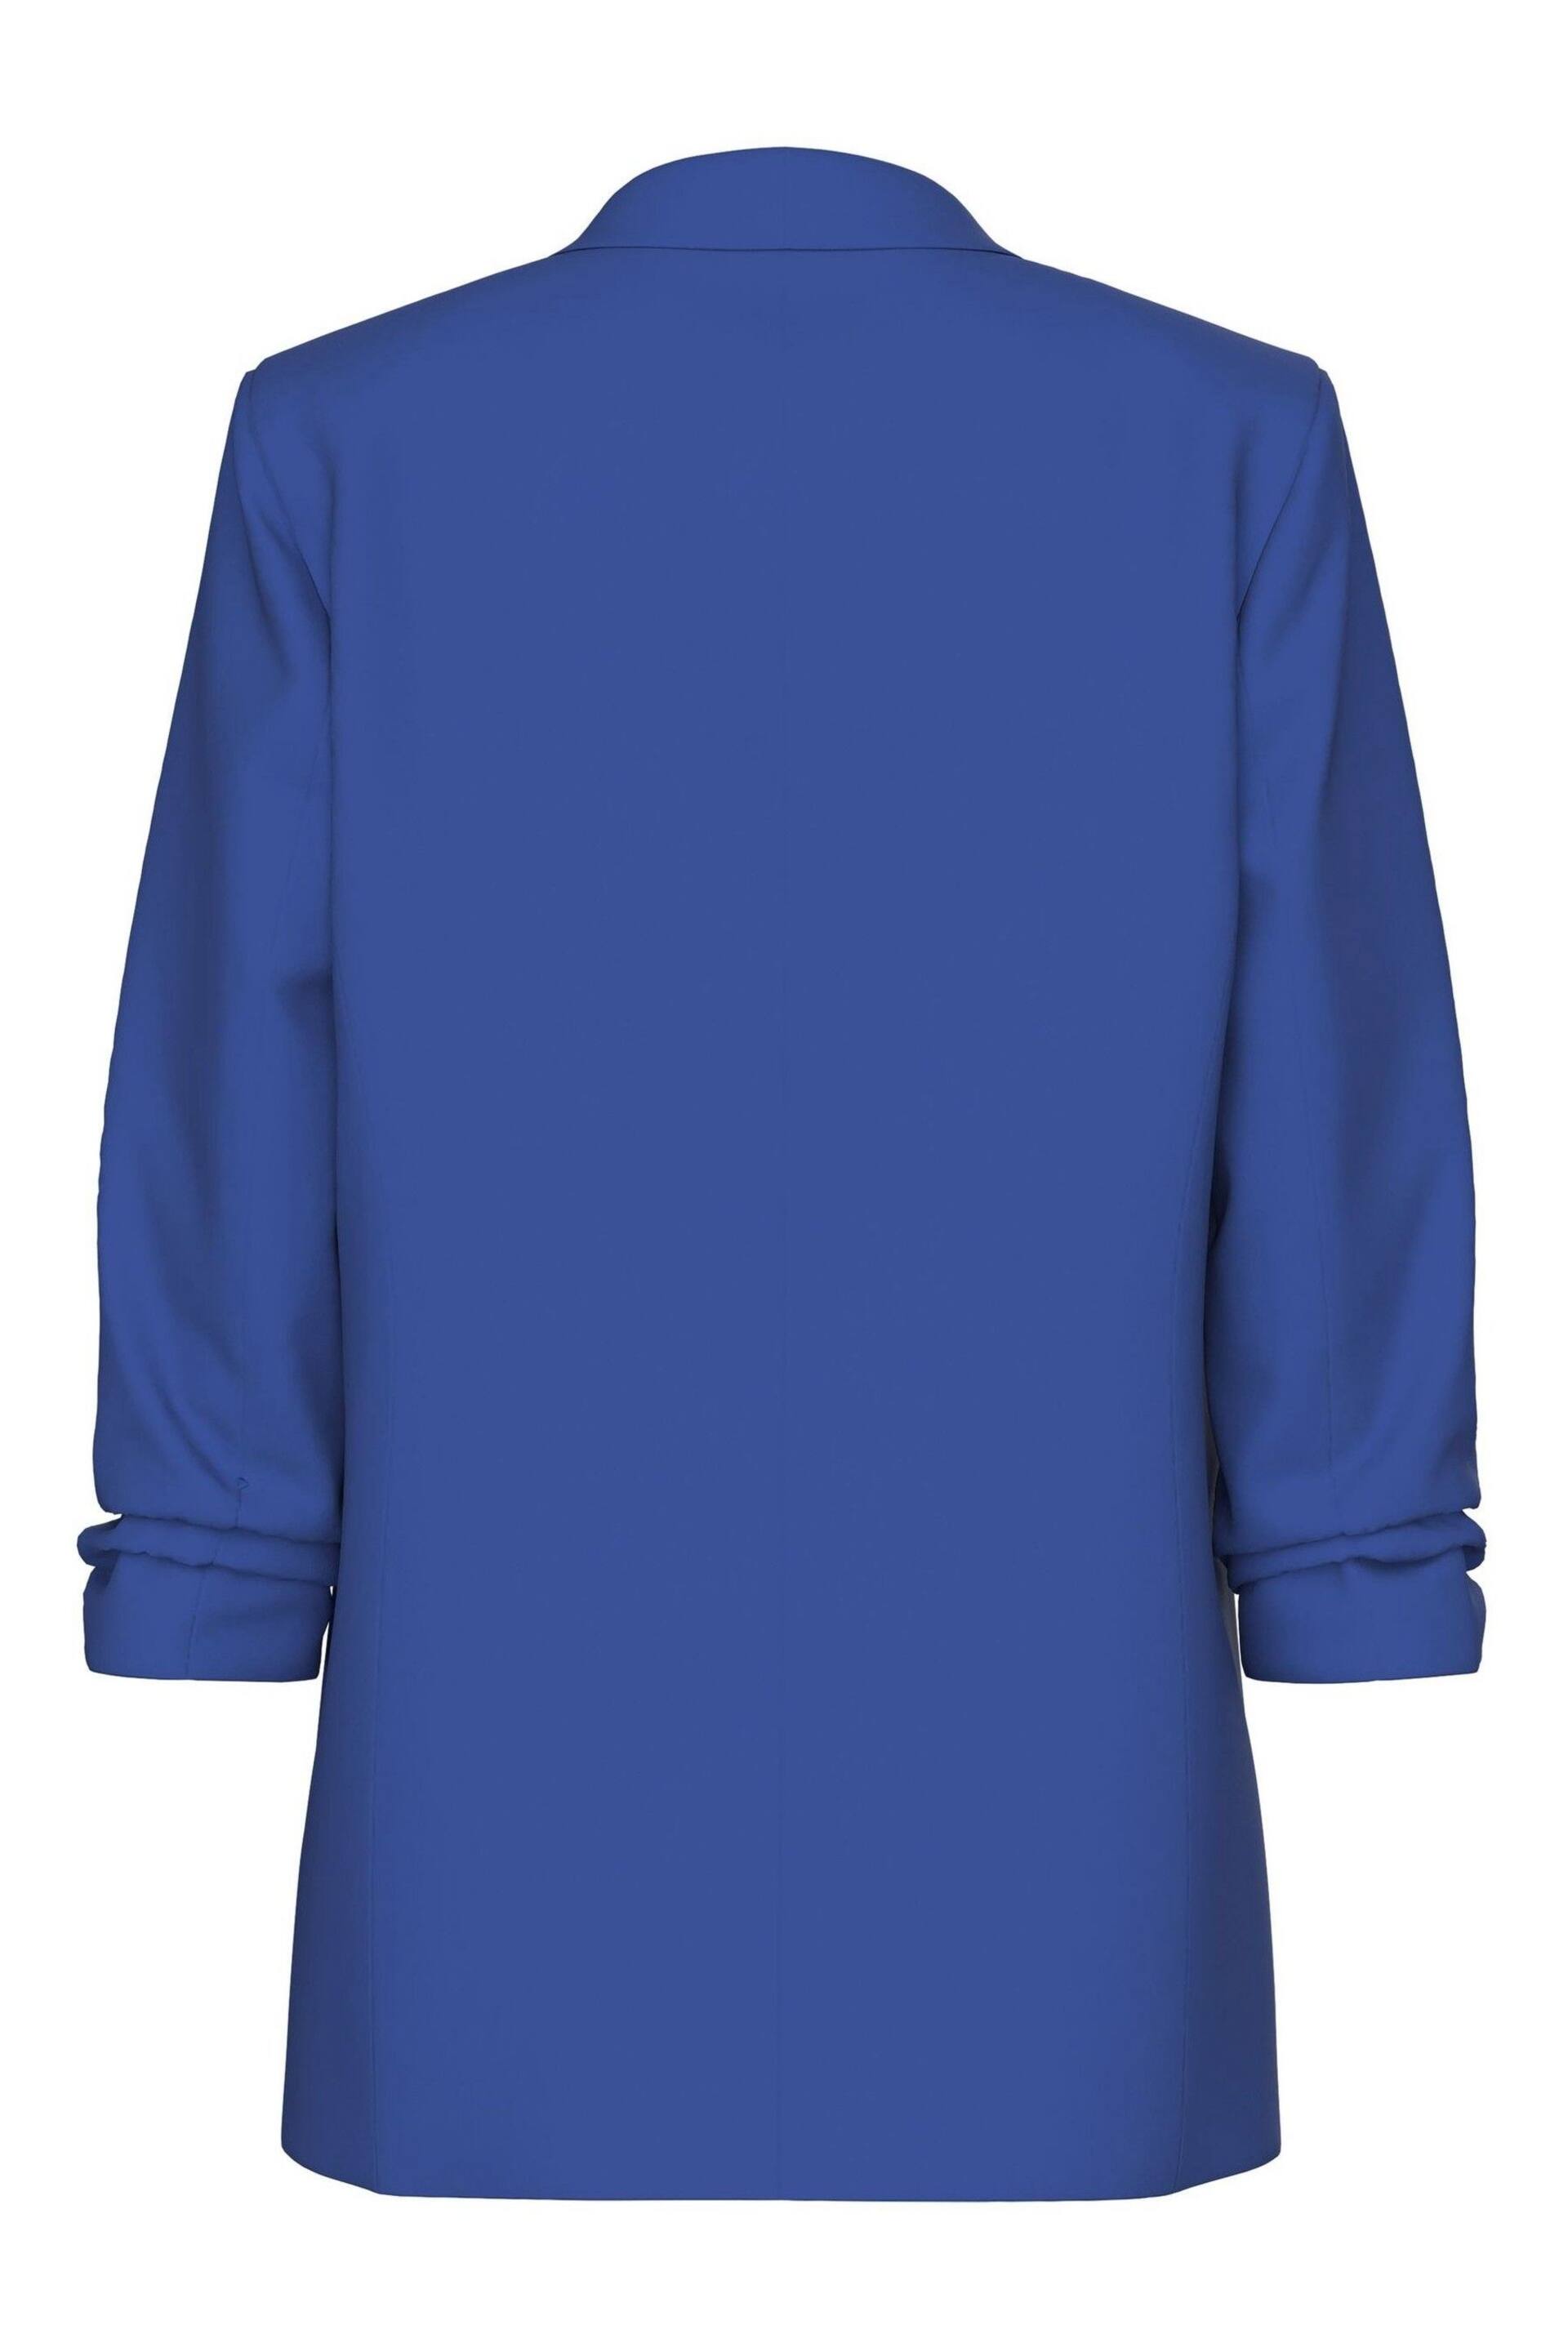 PIECES Blue Relaxed Ruched Sleeve Workwear Blazer - Image 6 of 6